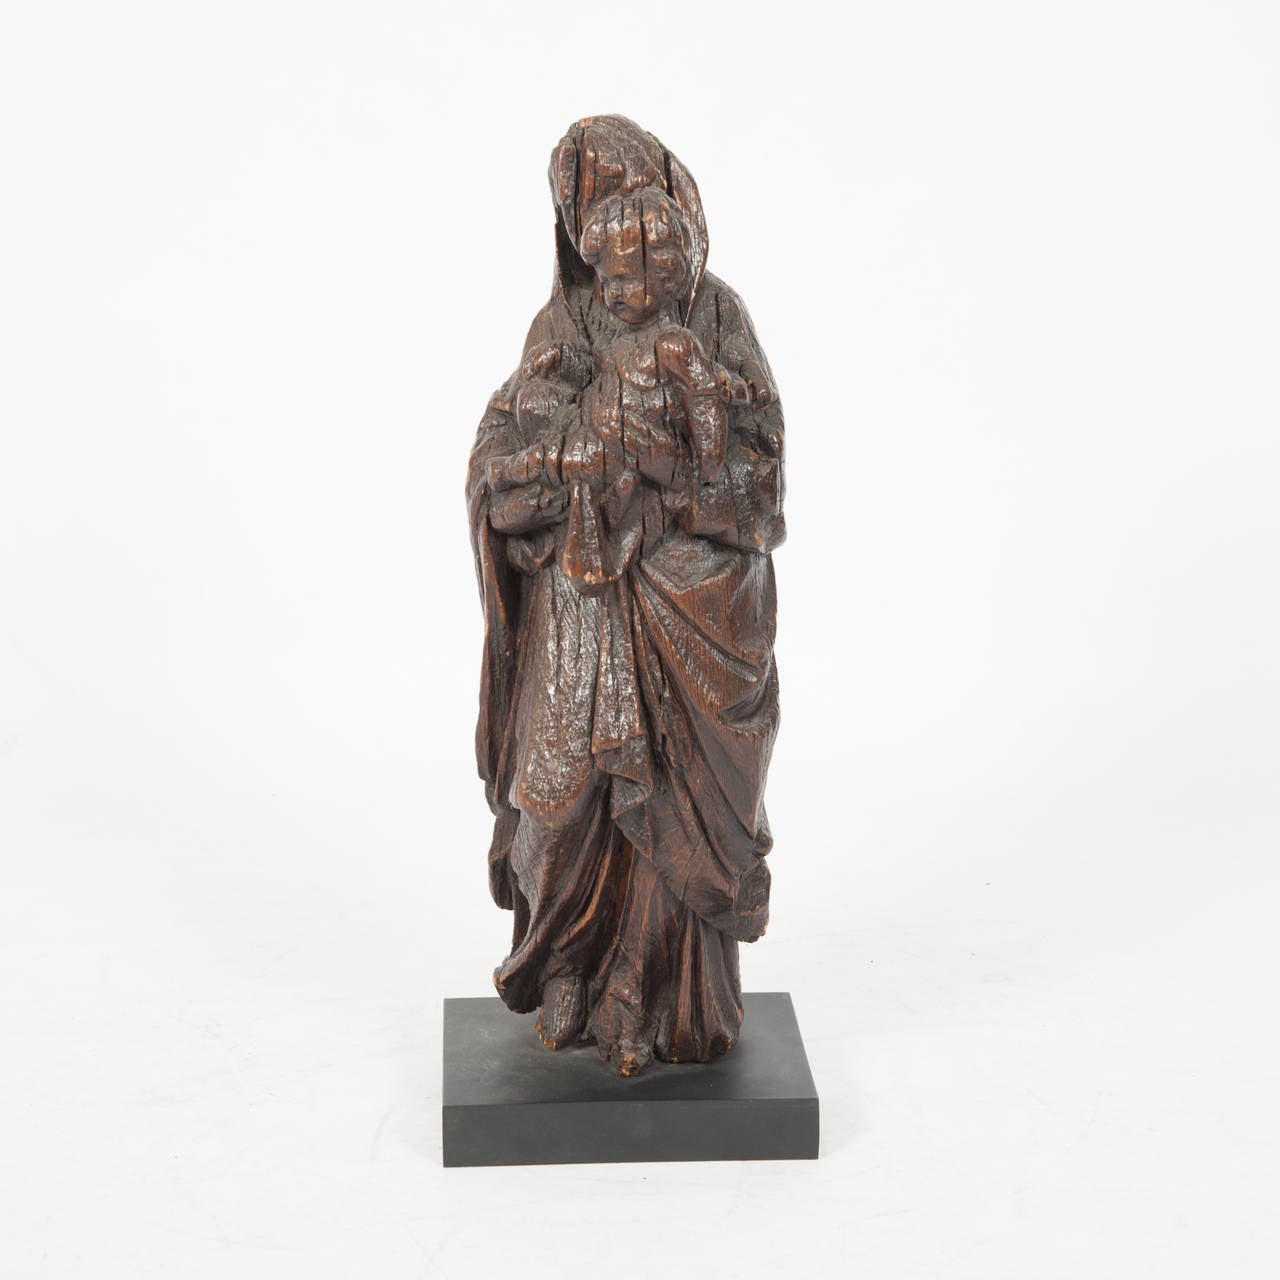 Italian 17th century timber carving of Madonna and Child.